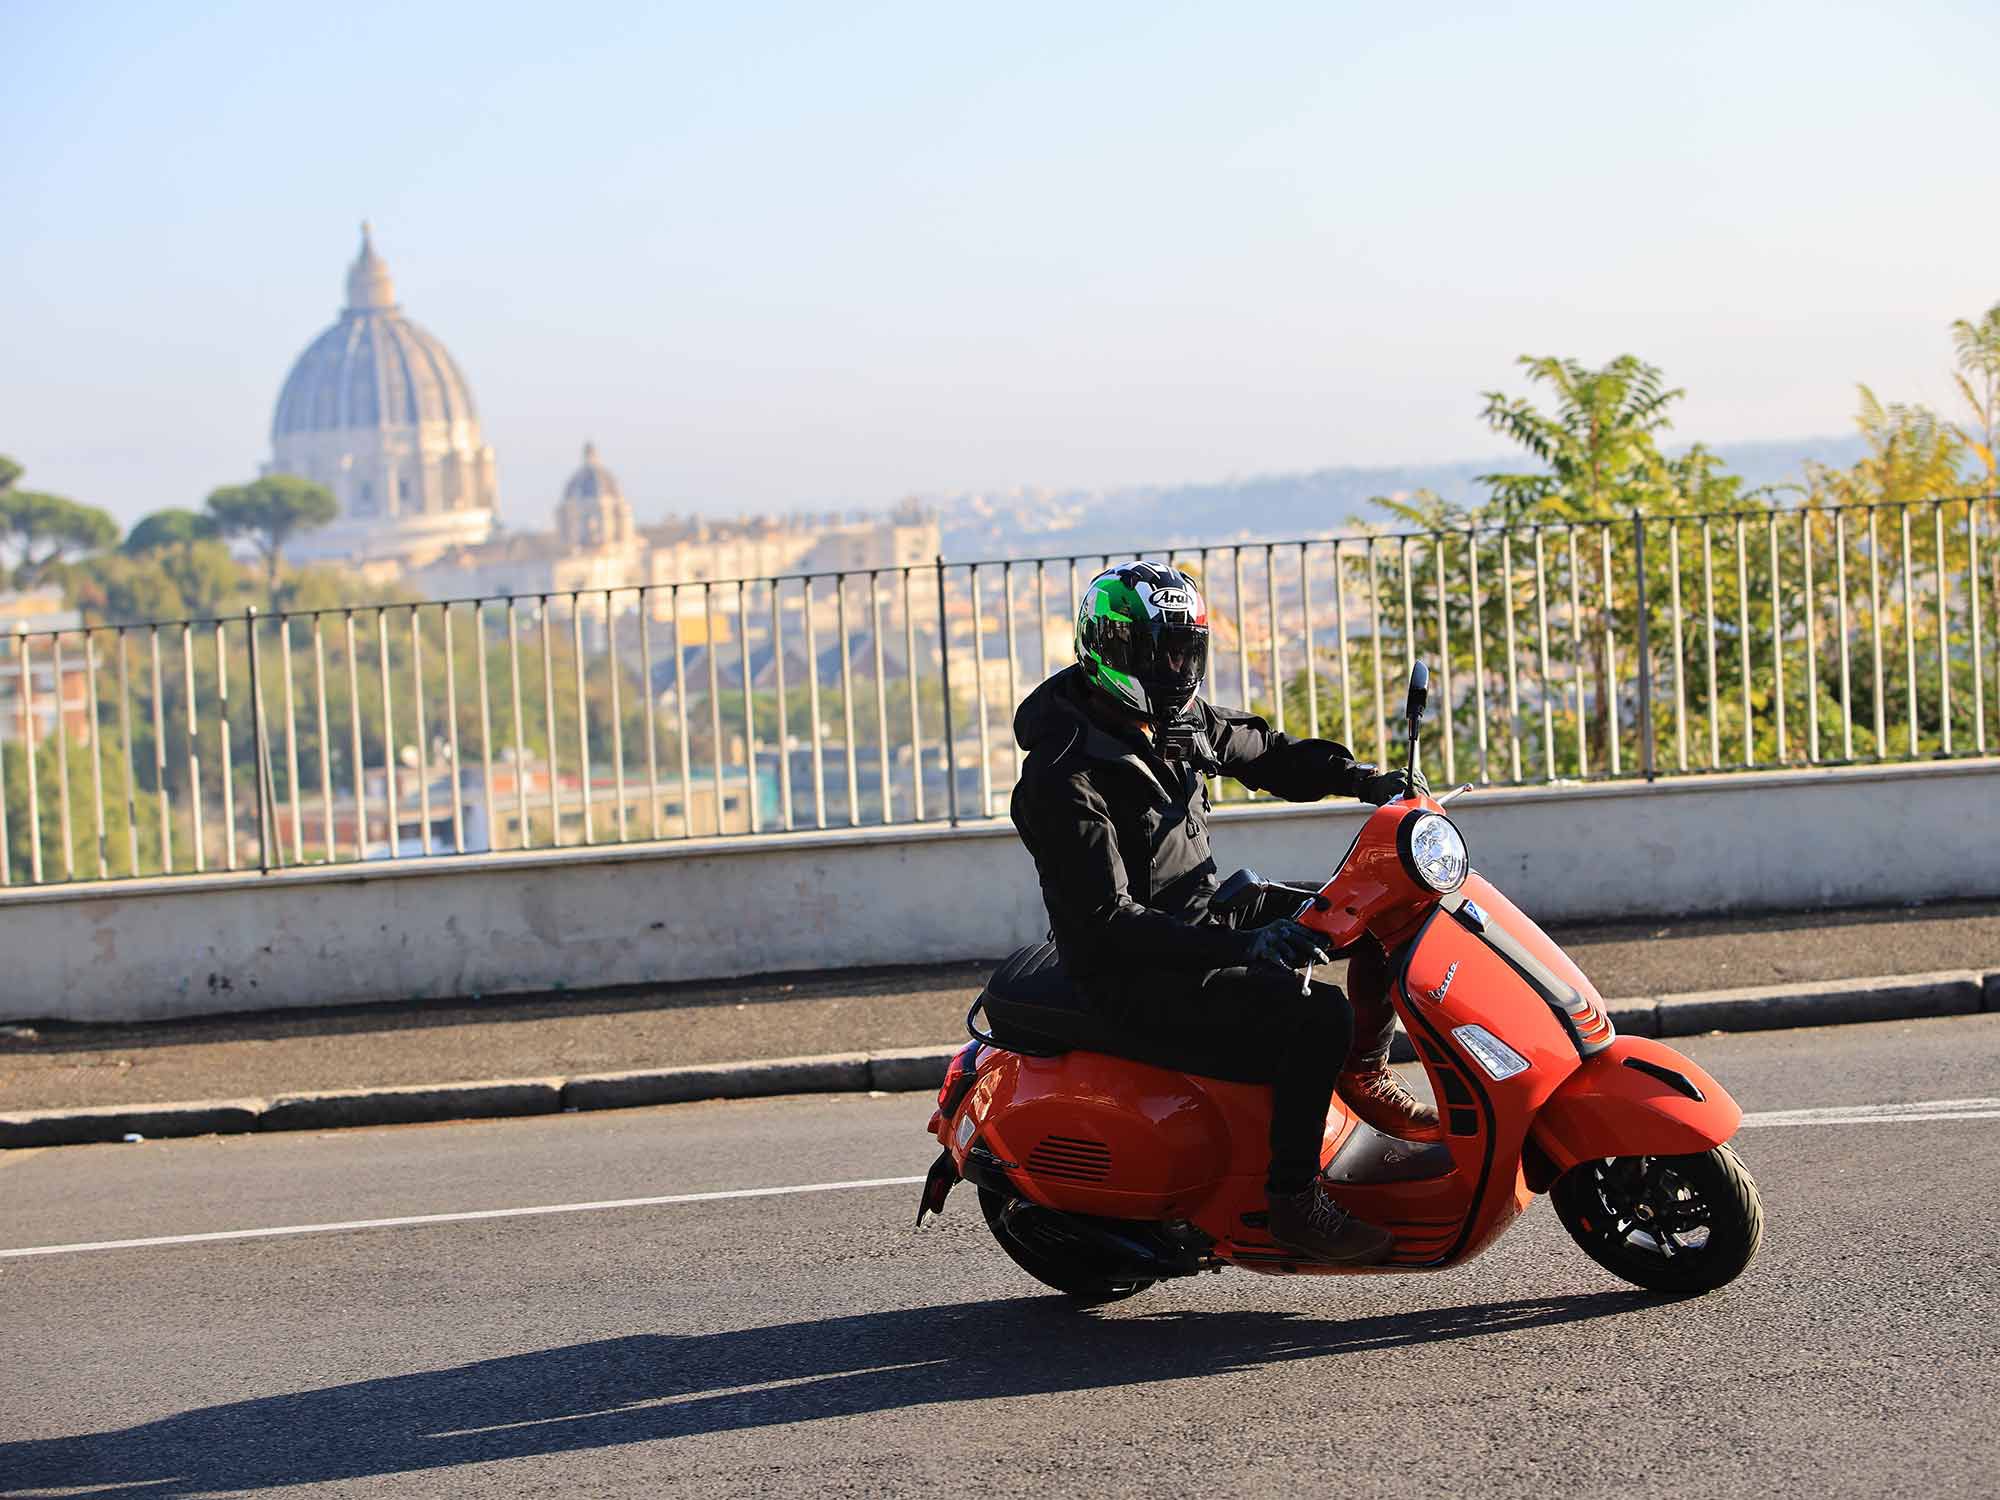 We explore the ancient city of Rome aboard Vespa’s 2023 GTS 300 gasoline-powered scooter.